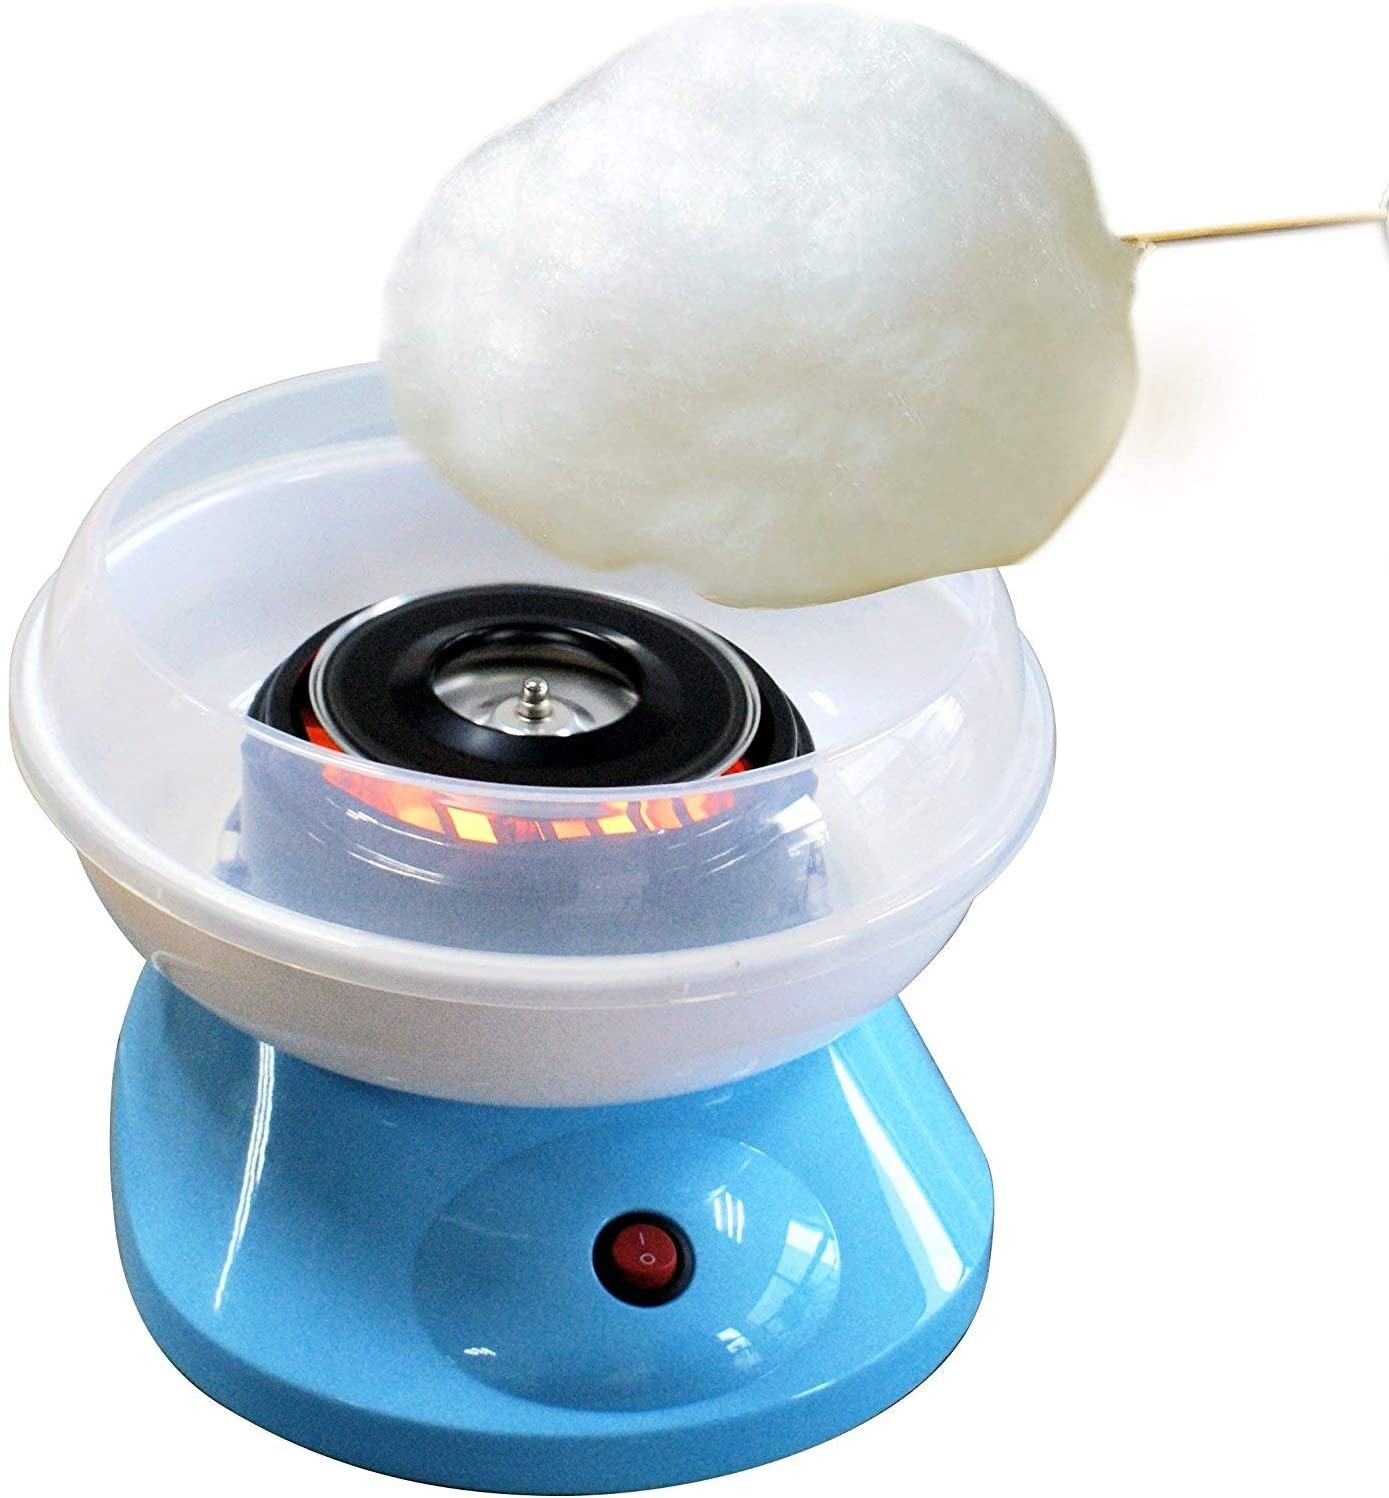 Syntrox Germany Electric Candy Maker Blue Cotton Candy Maker with Measuring Spoon and 10 Wooden Sticks